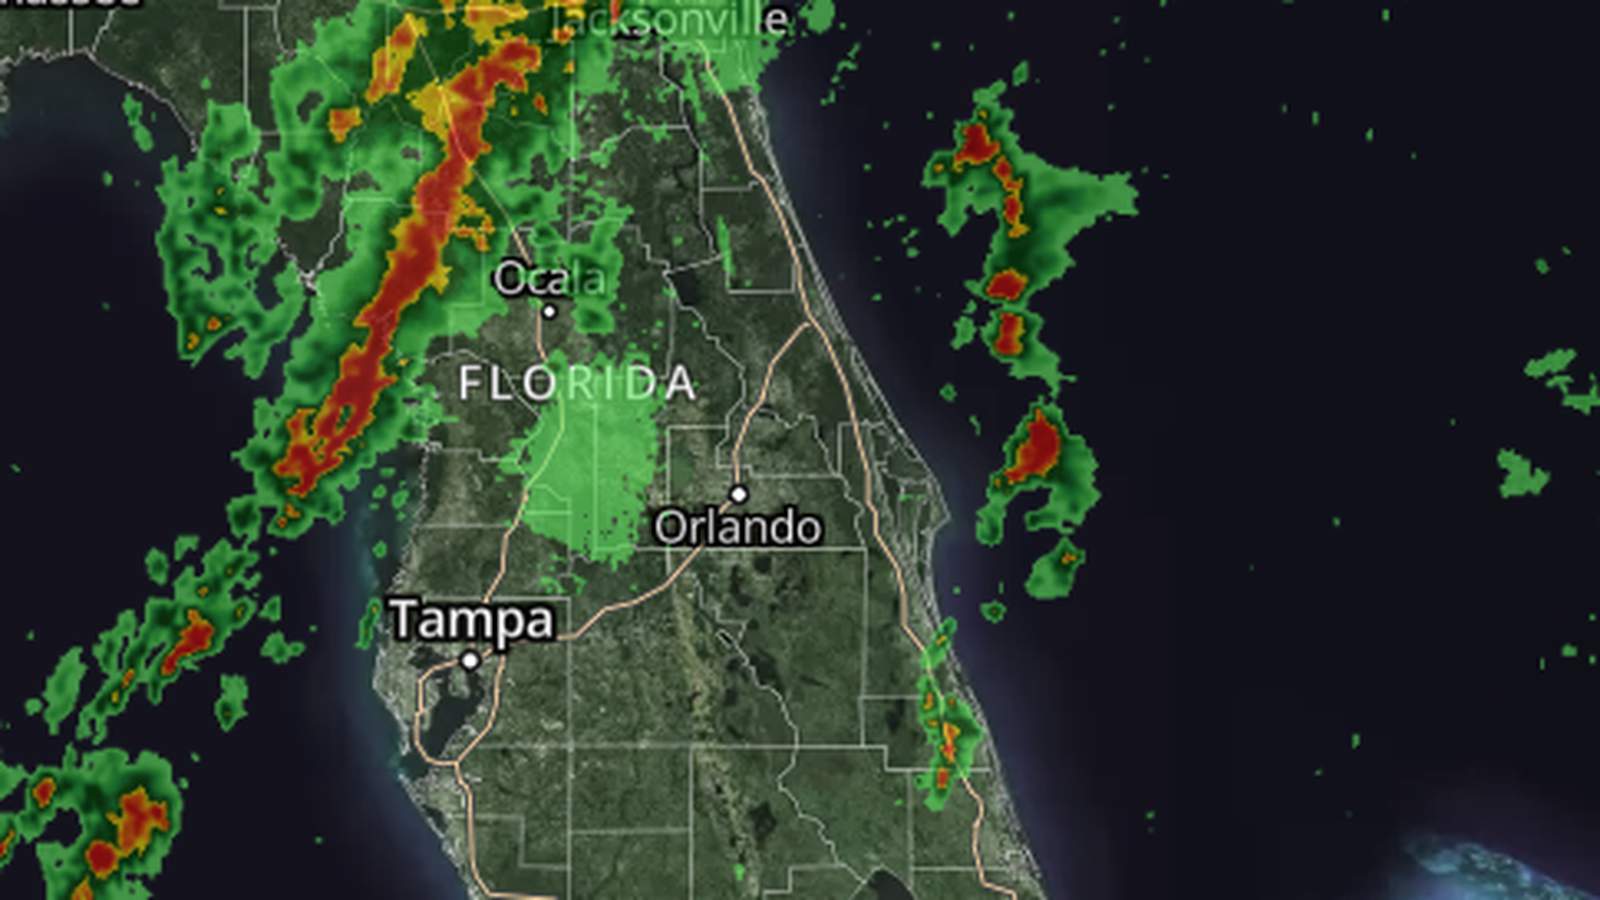 Timeline: Cold front moves through Central Florida